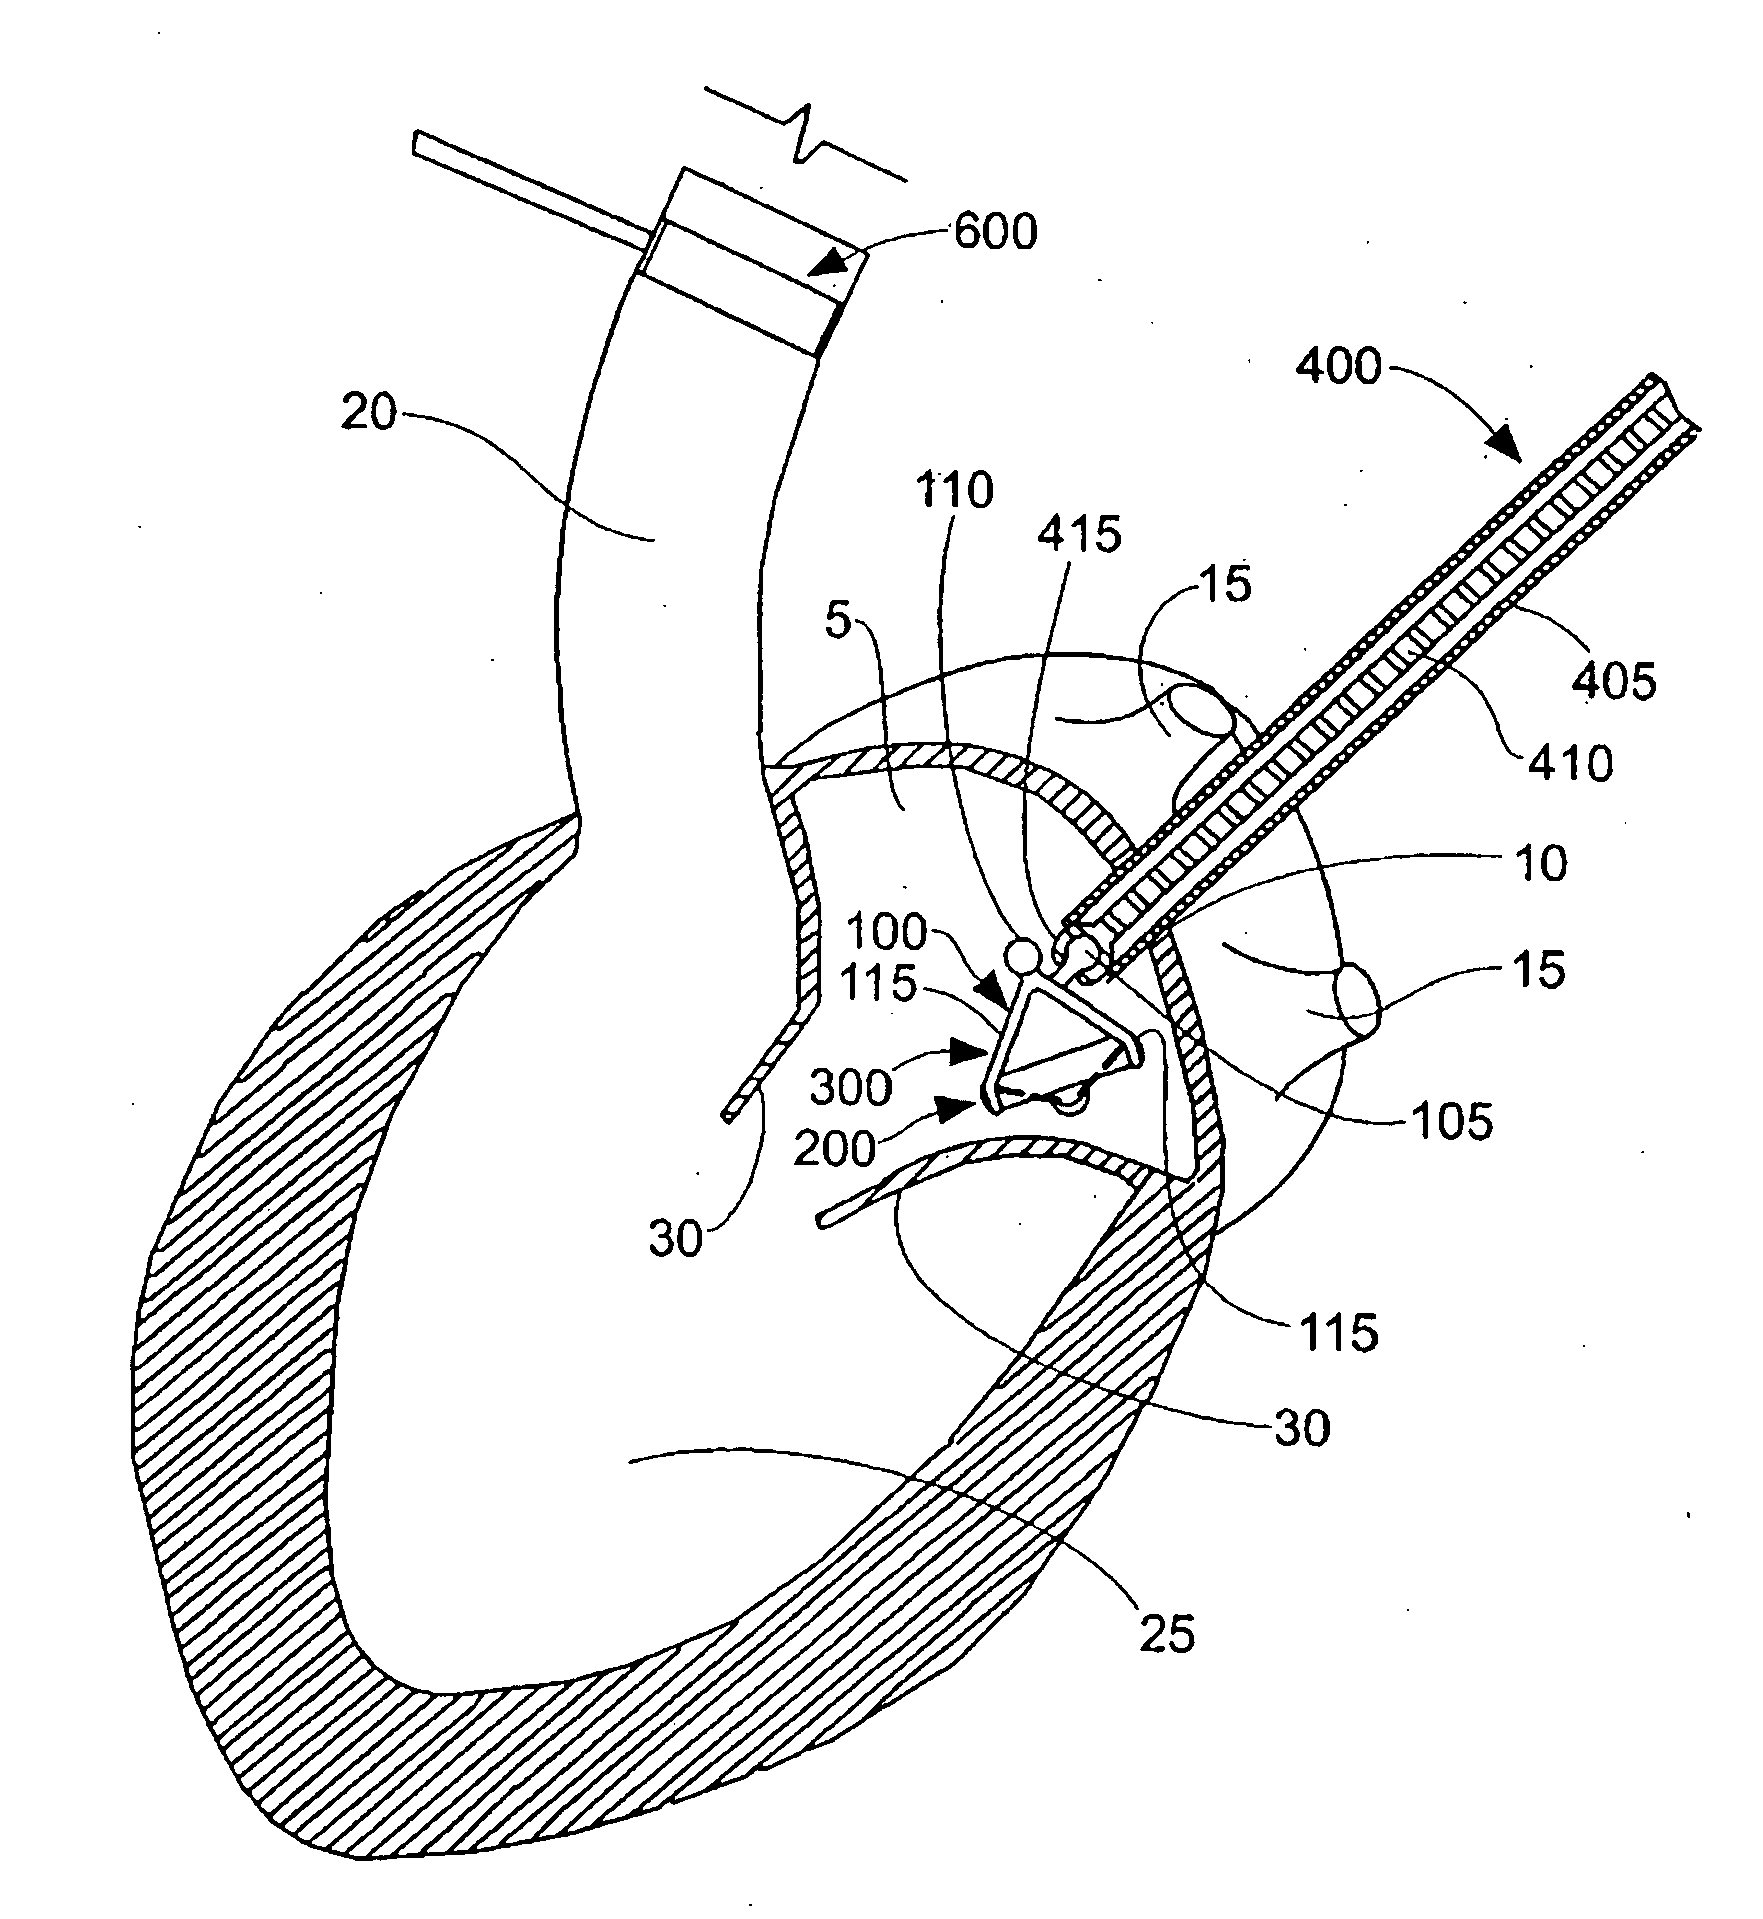 Method and apparatus for resecting and replacing an aortic valve